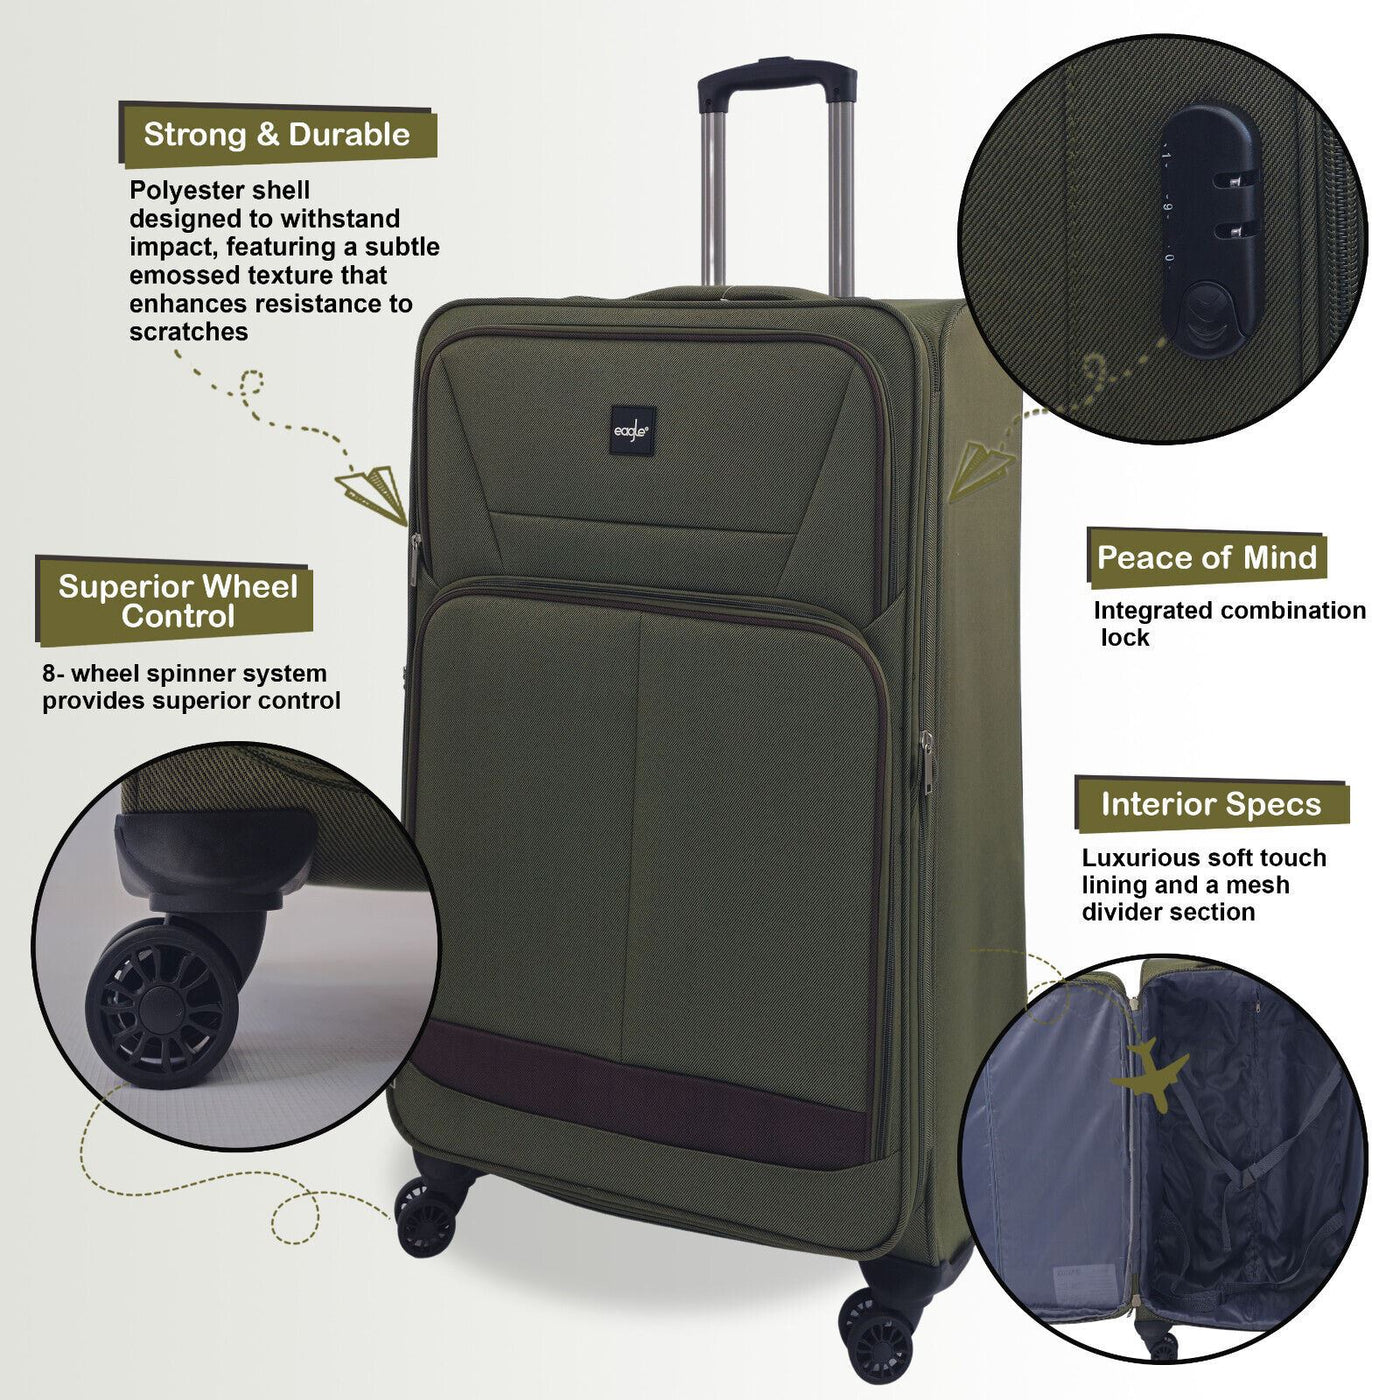 Soft Shell Cabin Suitcase 54 x 38 x 21 cm Lightweight Luggage Suitable for Easyjet, Ryanair